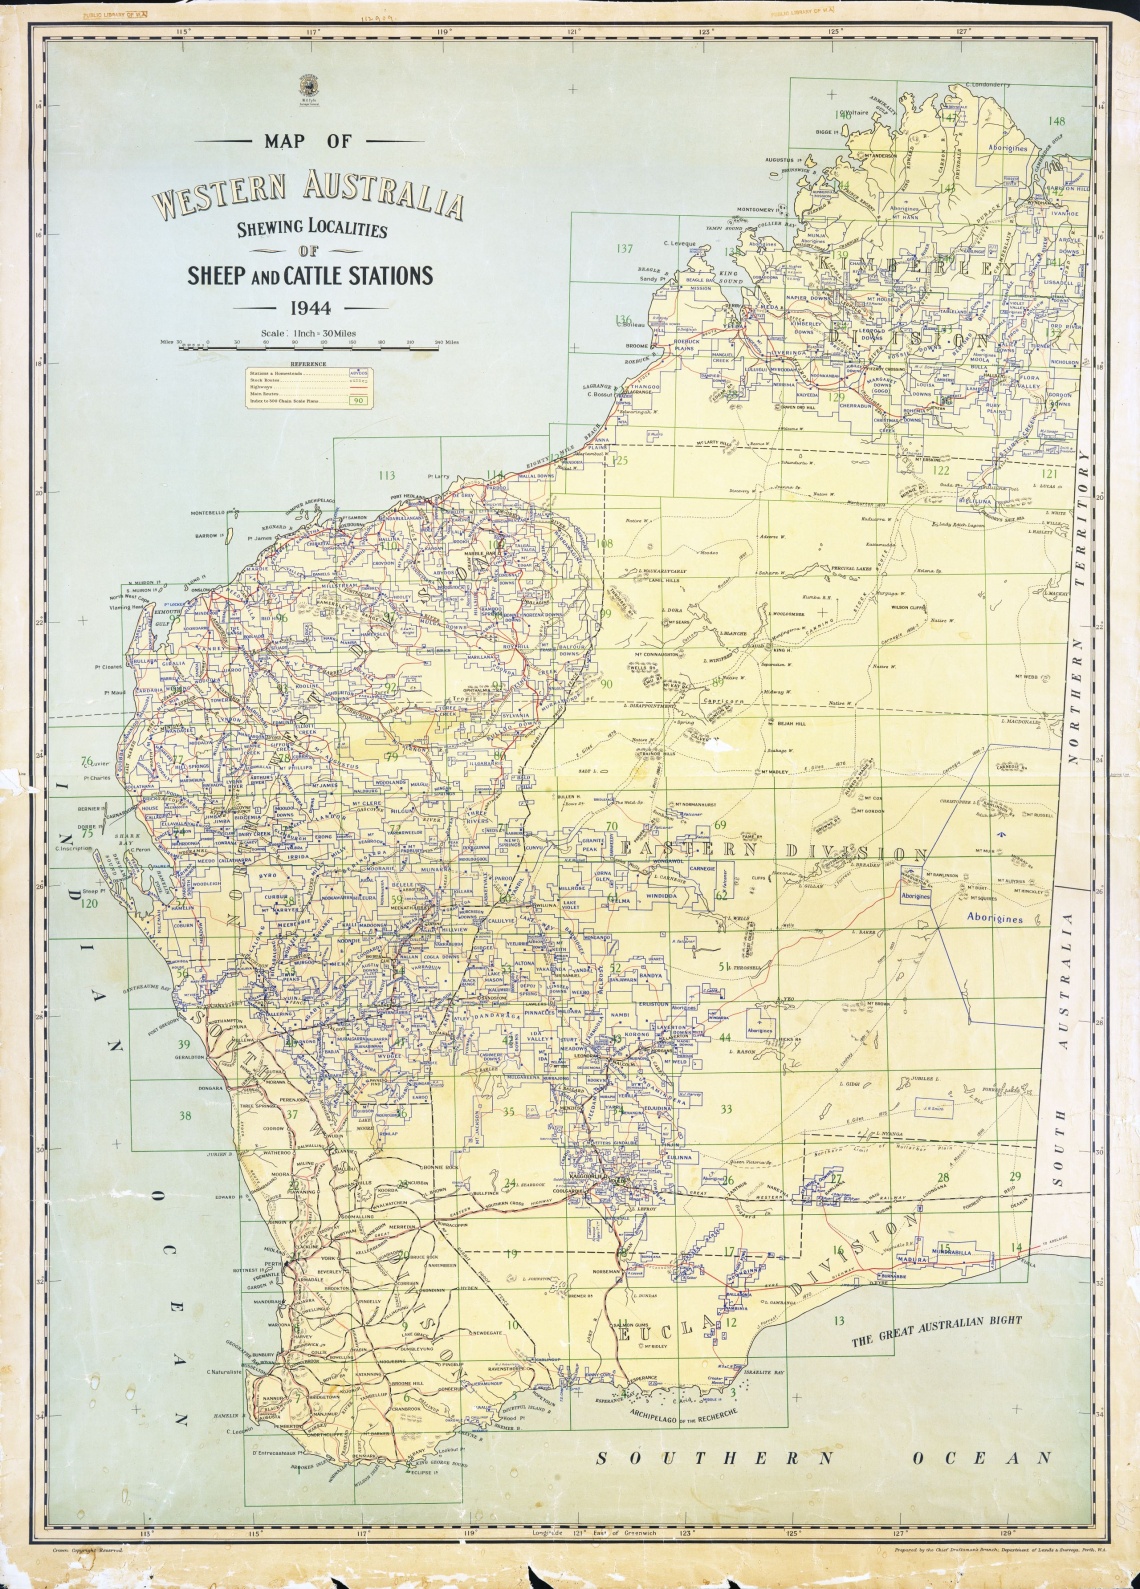 Map of Western Australia shewing localities of sheep and cattle stations 1944